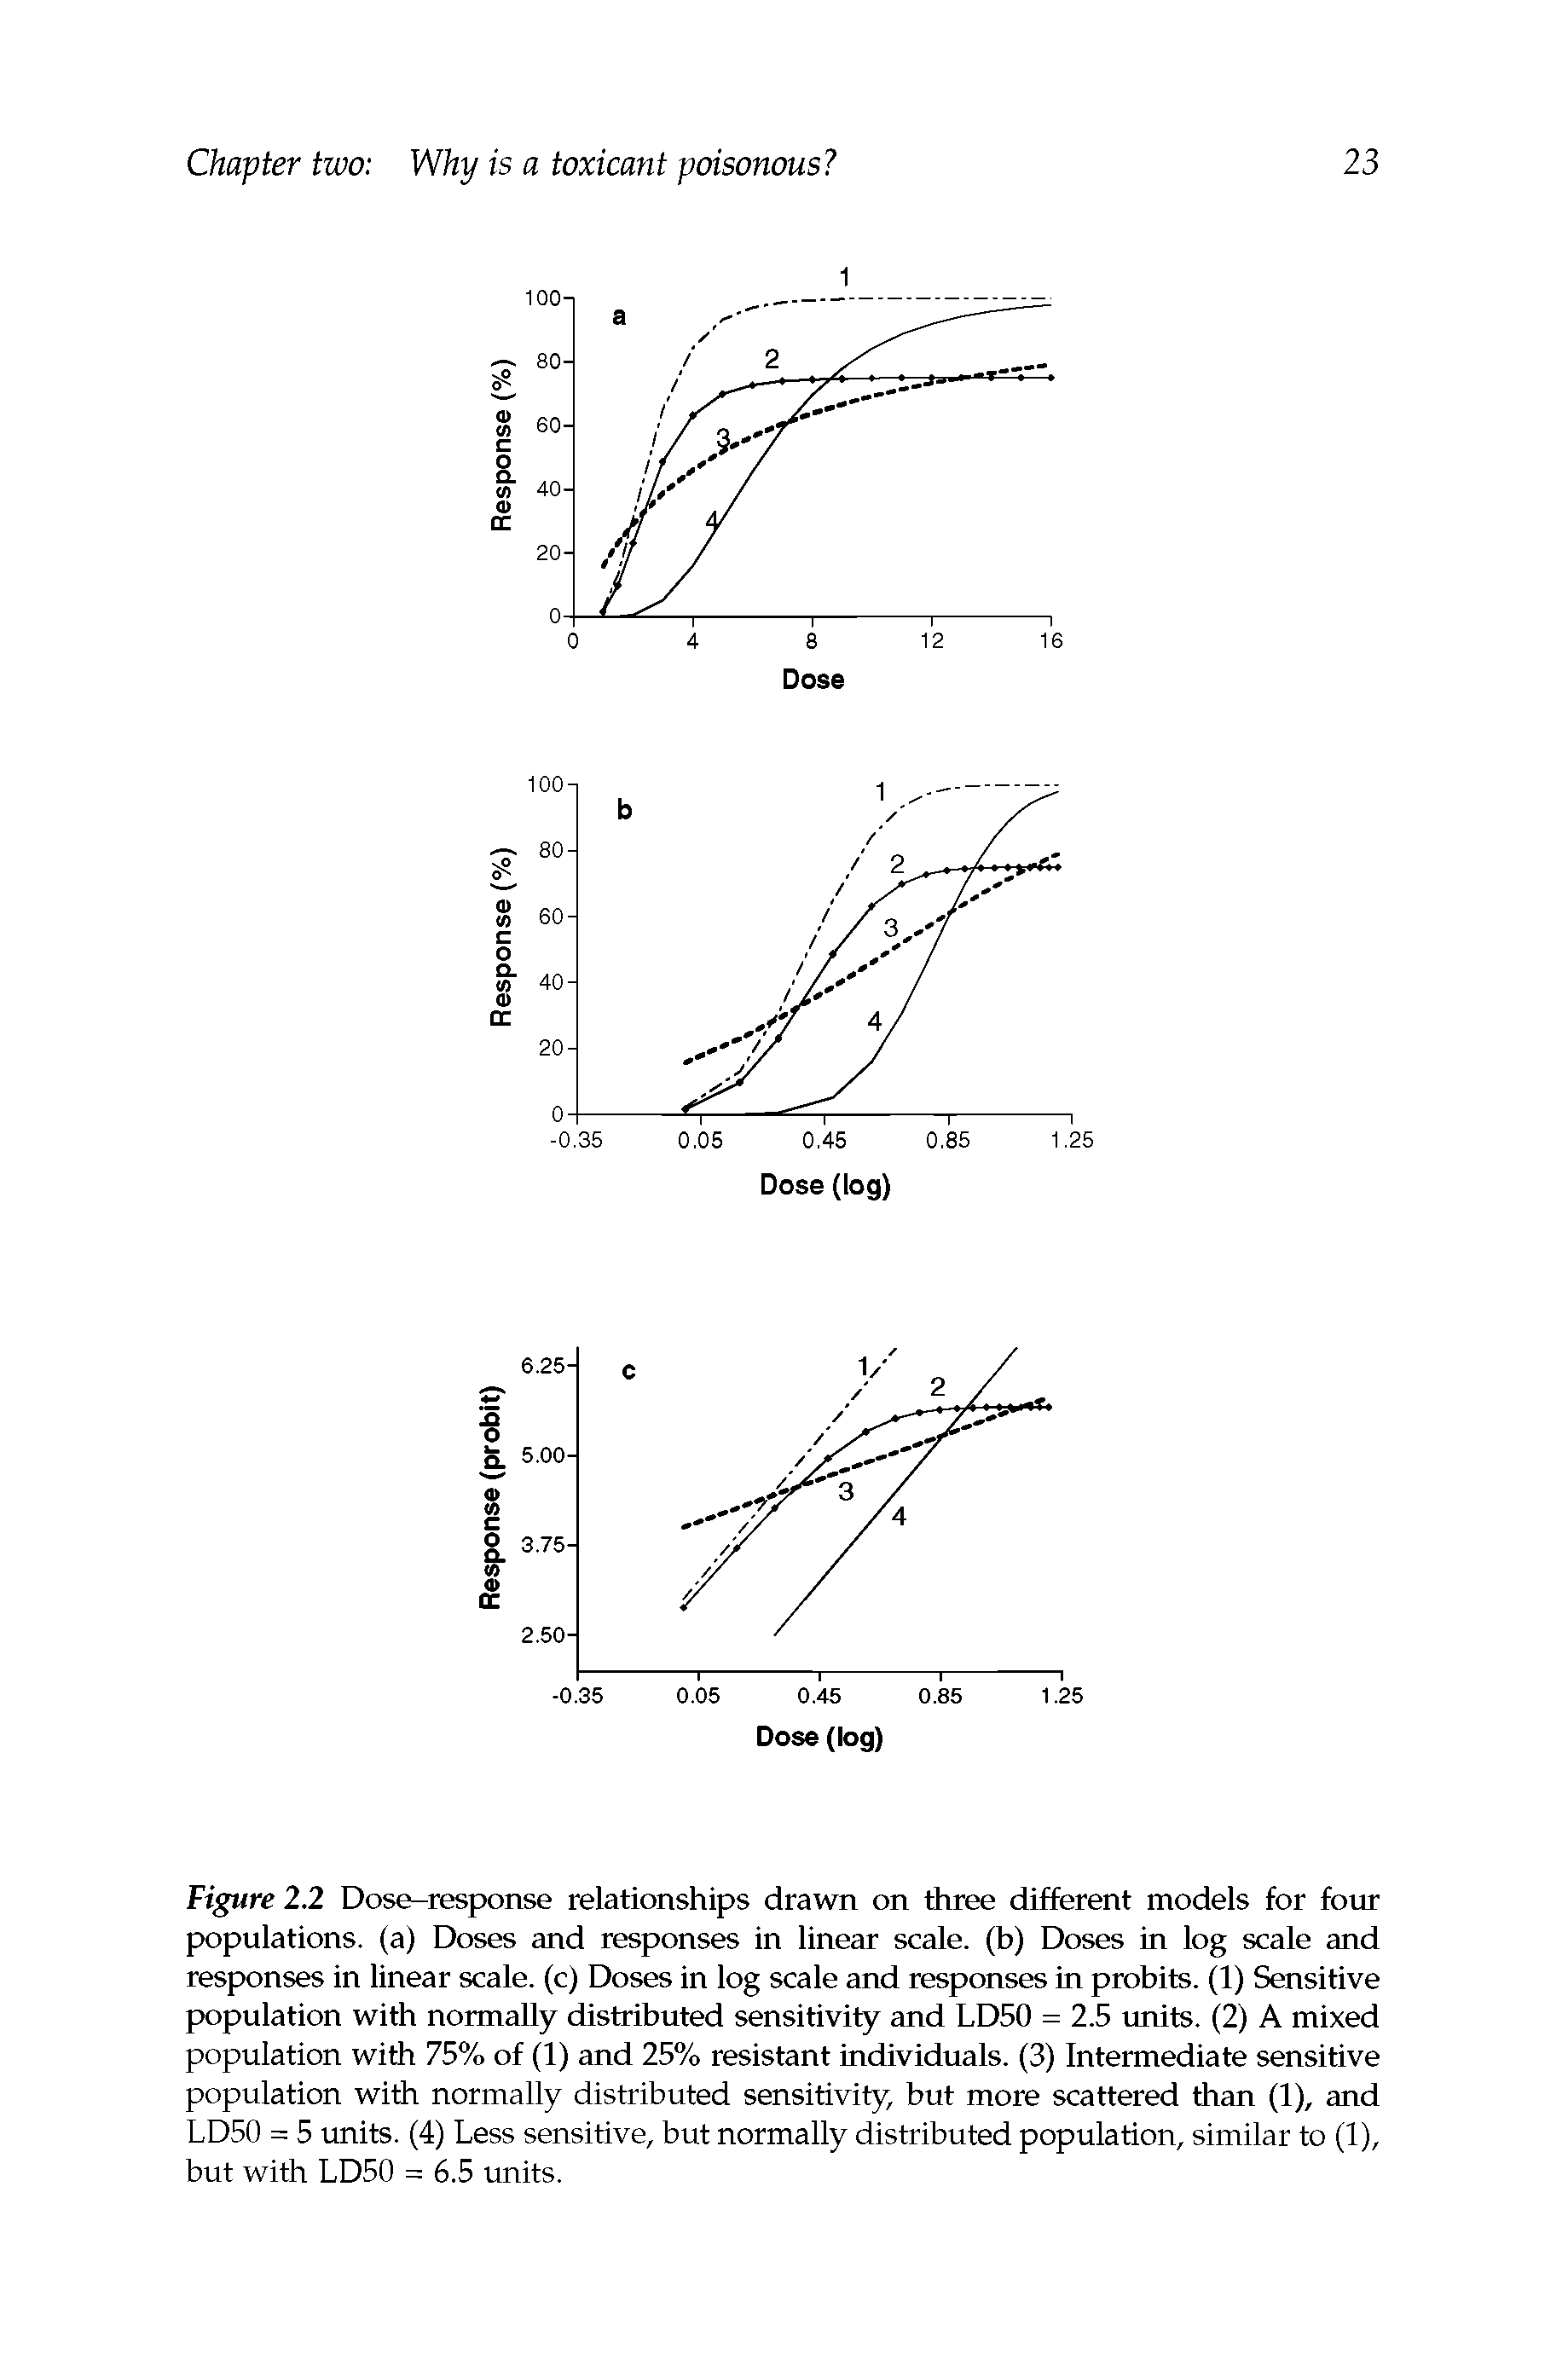 Figure 2.2 Dose-response relationships drawn on three different models for four populations, (a) Doses and responses in linear scale, (b) Doses in log scale and responses in linear scale, (c) Doses in log scale and responses in probits. (1) Sensitive population with normally distributed sensitivity and LD50 = 2.5 units. (2) A mixed population with 75% of (1) and 25% resistant individuals. (3) Intermediate sensitive population with normally distributed sensitivity, but more scattered than (1), and LD50 = 5 units. (4) Less sensitive, but normally distributed population, similar to (1), but with LD50 = 6.5 units.